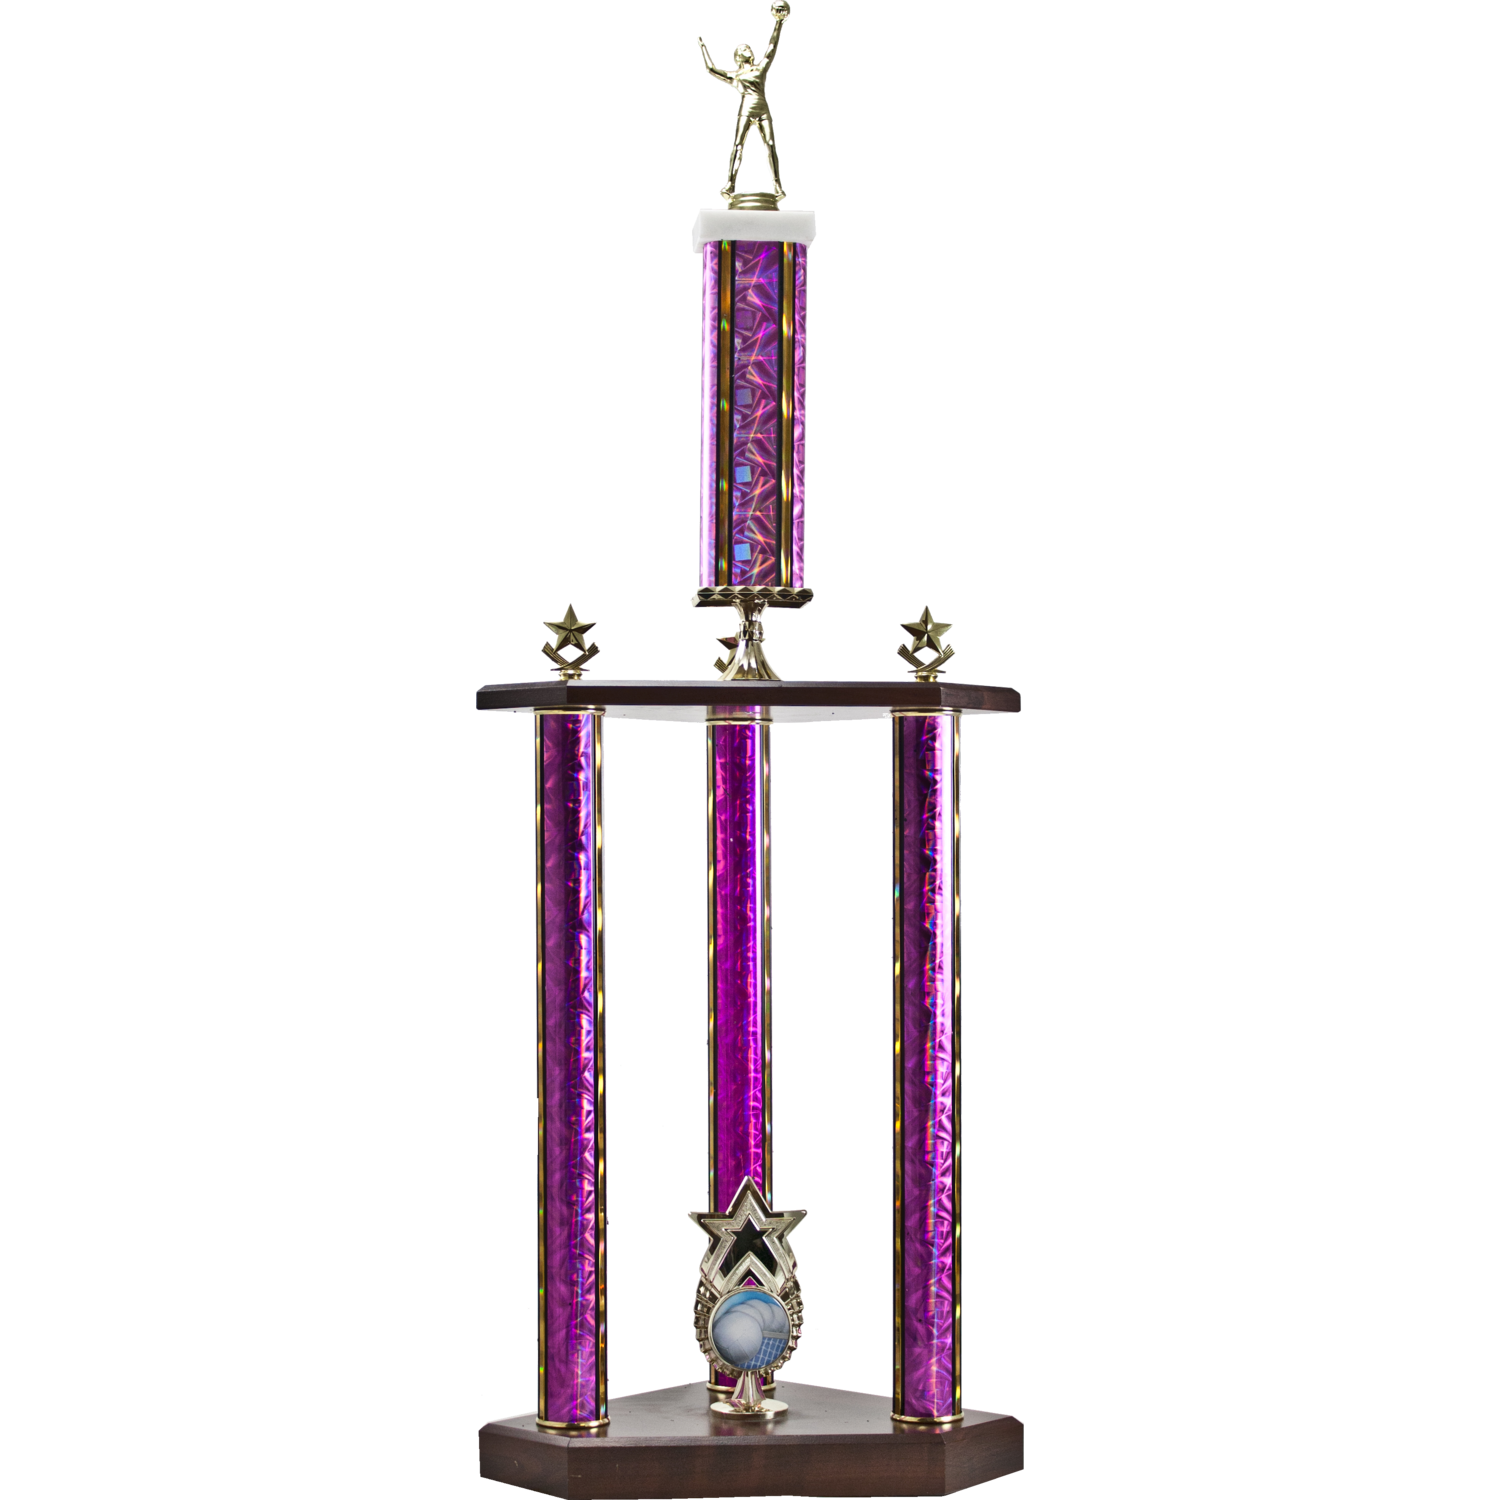 Traditional Series Two-Tier 3 Post Trophy with Star "Exclusive" Star